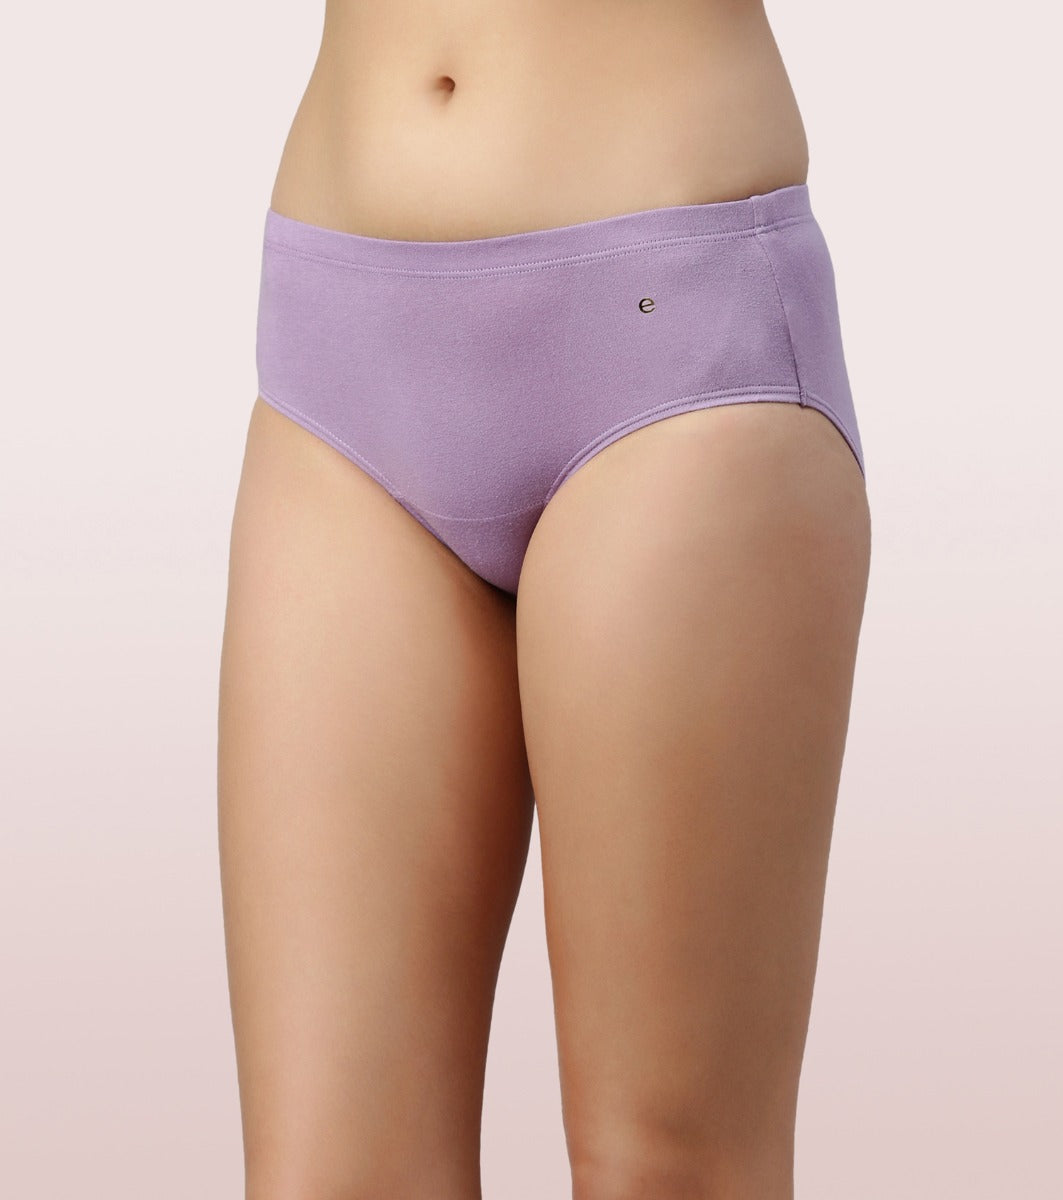 Enamor Mid Waist Co-Ordinate Panty for Womens-P087 Briefs